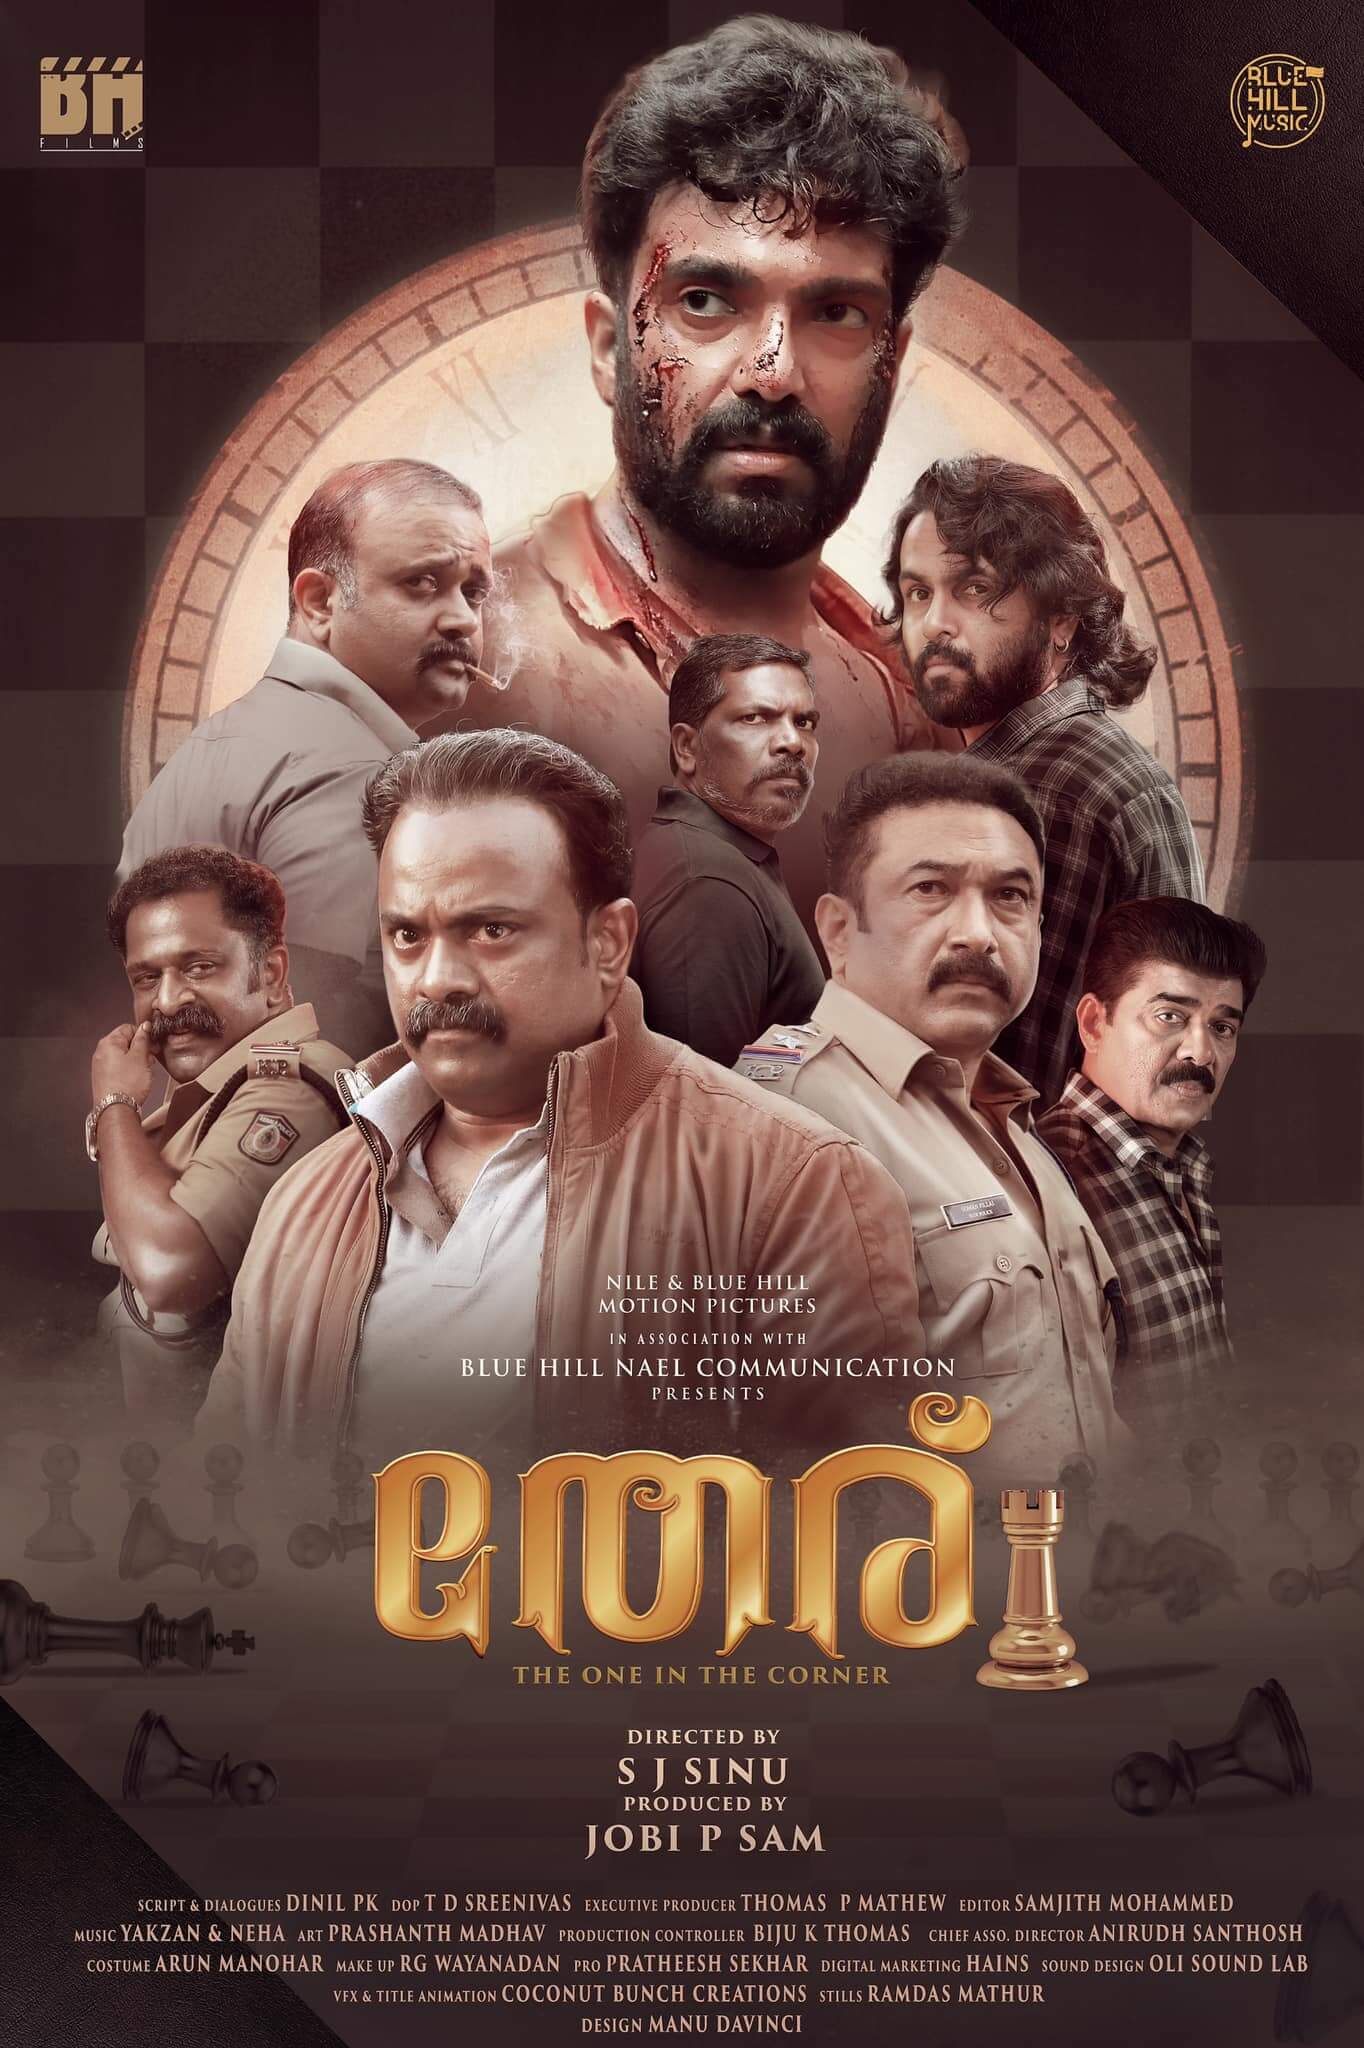 Theru Movie (2023) Cast, Roles, Trailer, Story, Release Date, Poster